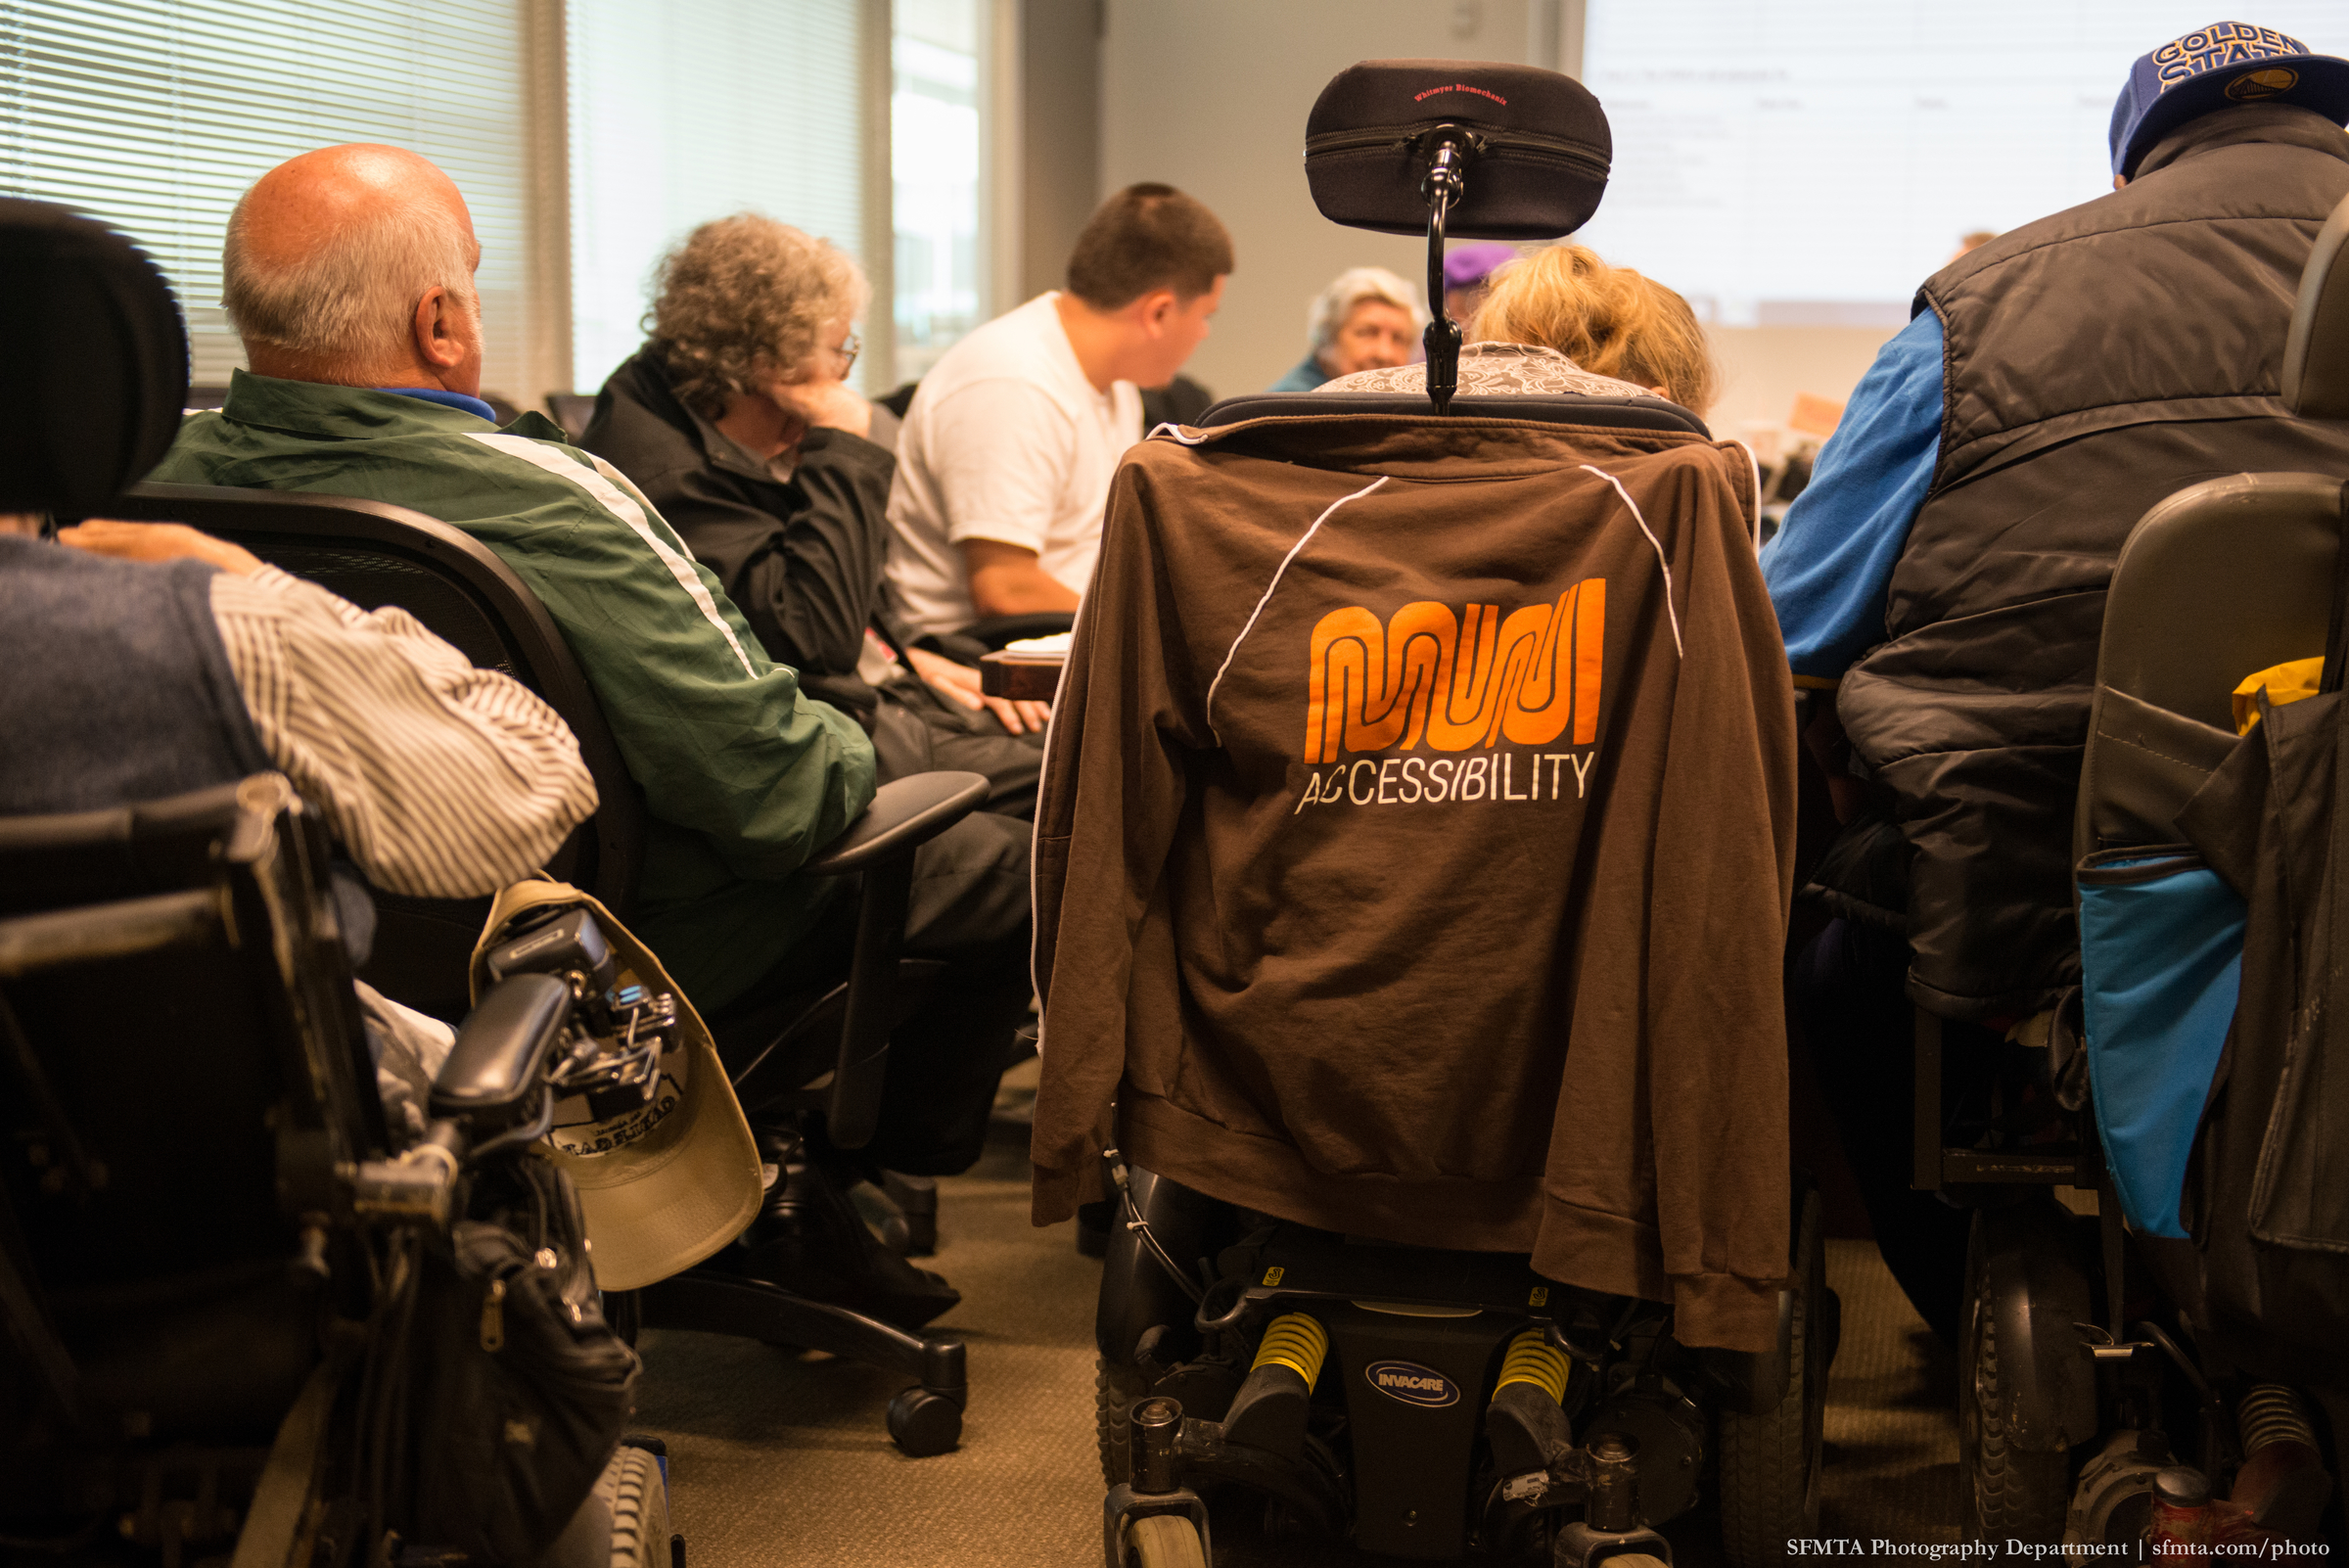 Several people sit in a conference room, facing away. The three in the front  are using wheelchairs. A brown jacket hangs from the one in the center with an orange "Muni" worm logo on the back and the work "Accessiblity" in white below it.